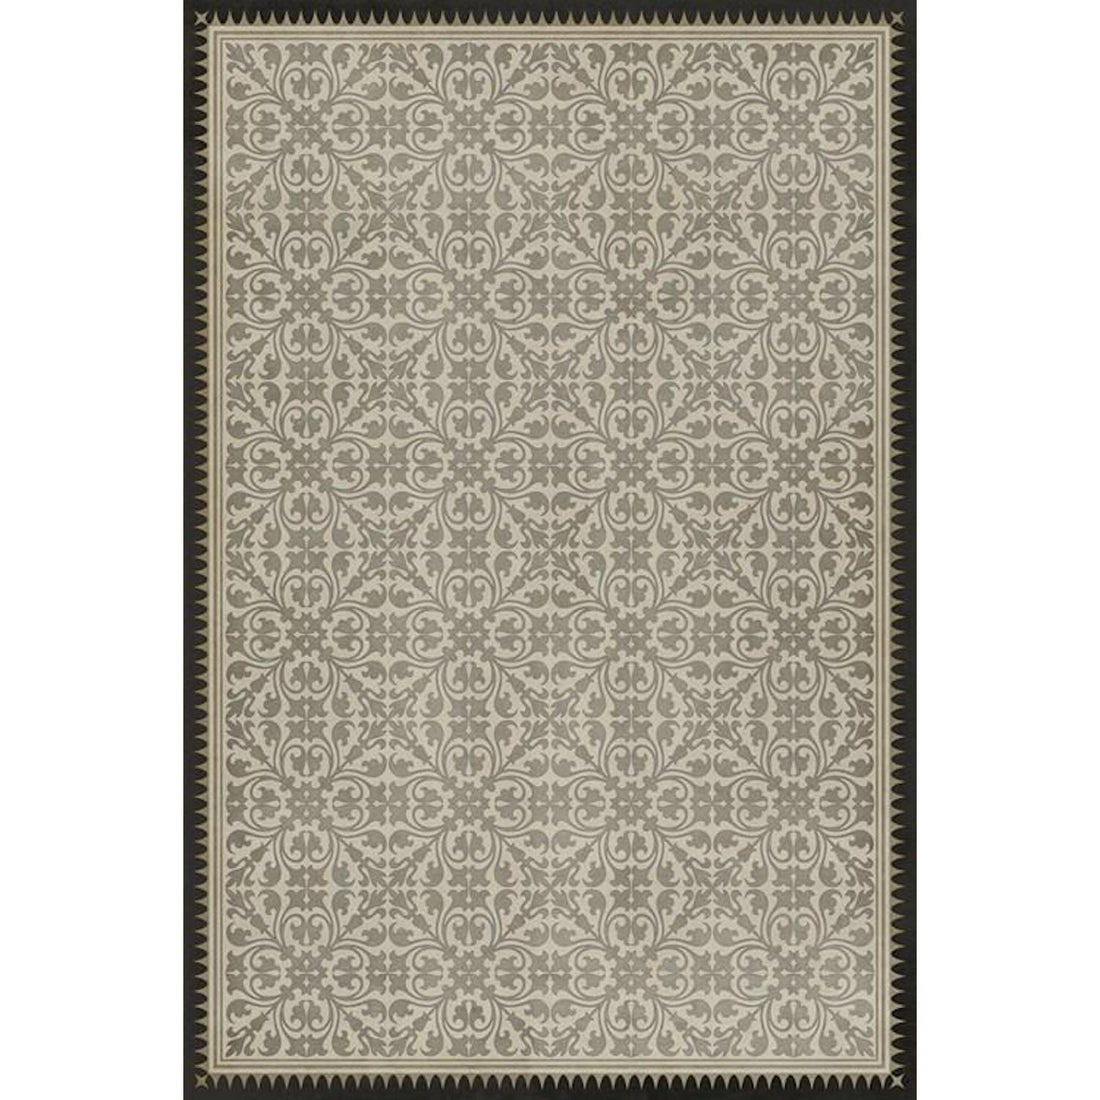 Traditional nonslip The White Knight Vinyl Rug - Pattern 21 with ornate floral design and a dark bordered edge by Spicher and Company.